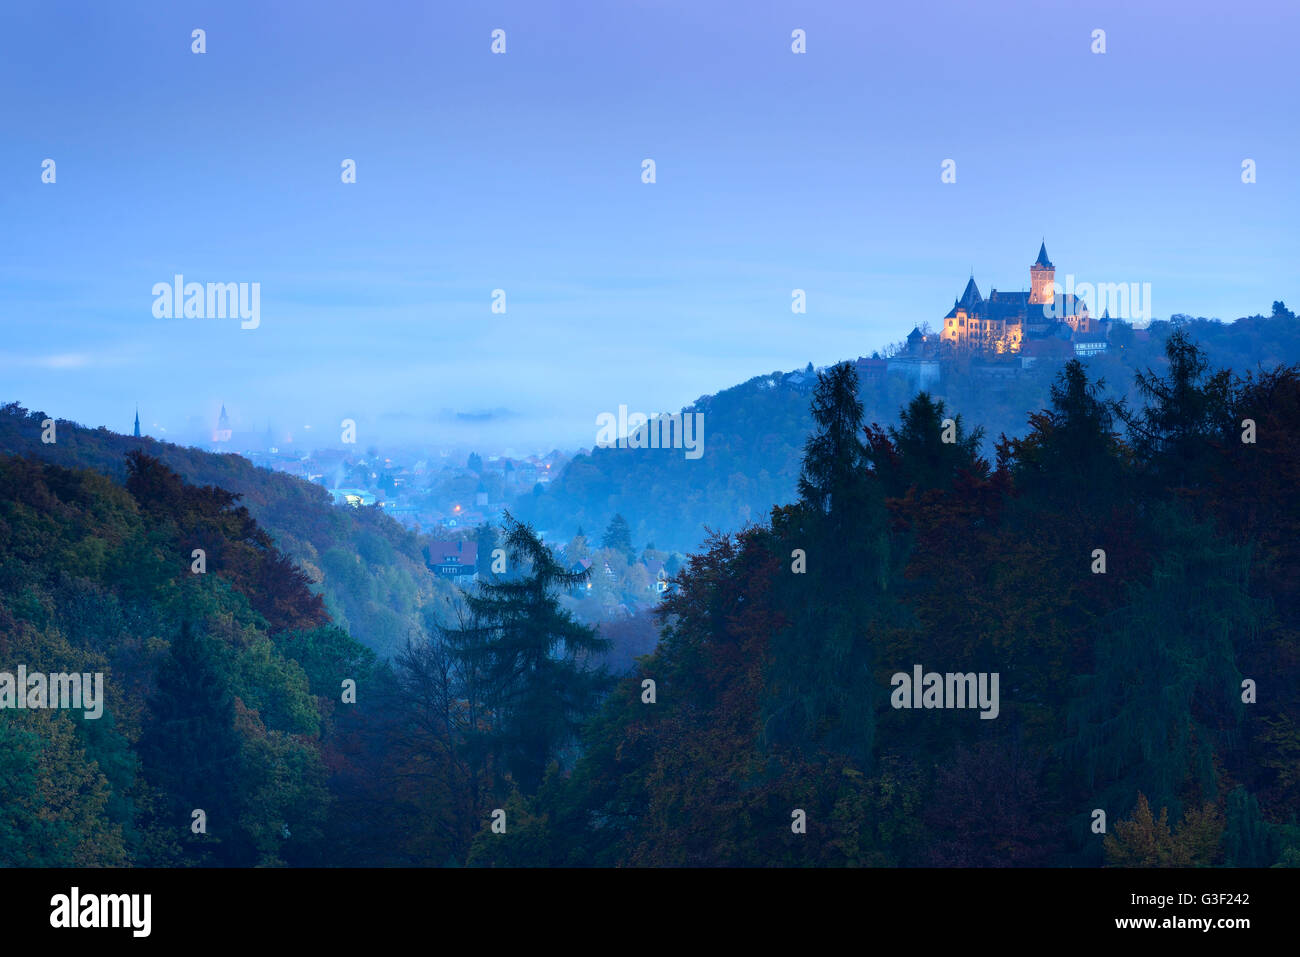 Town and castle Wernigerode at daybreak, in the background morning fog, Wernigerode, Saxony-Anhalt, Germany Stock Photo